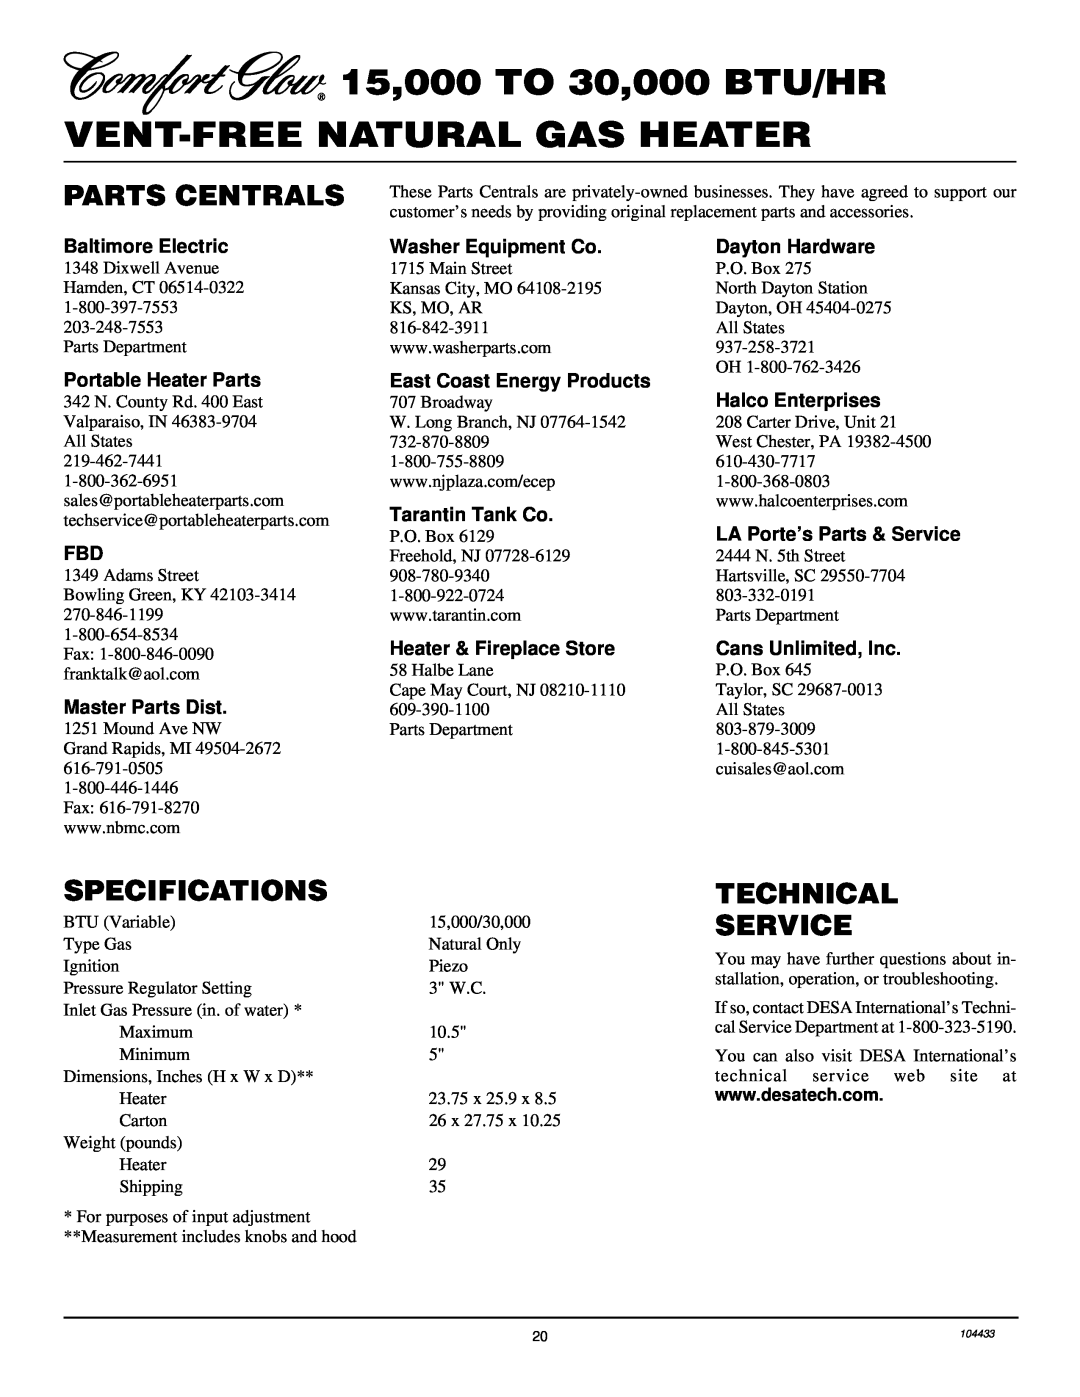 Desa RFN30T Parts Centrals, Specifications, Technical Service, Baltimore Electric, Portable Heater Parts, Dayton Hardware 